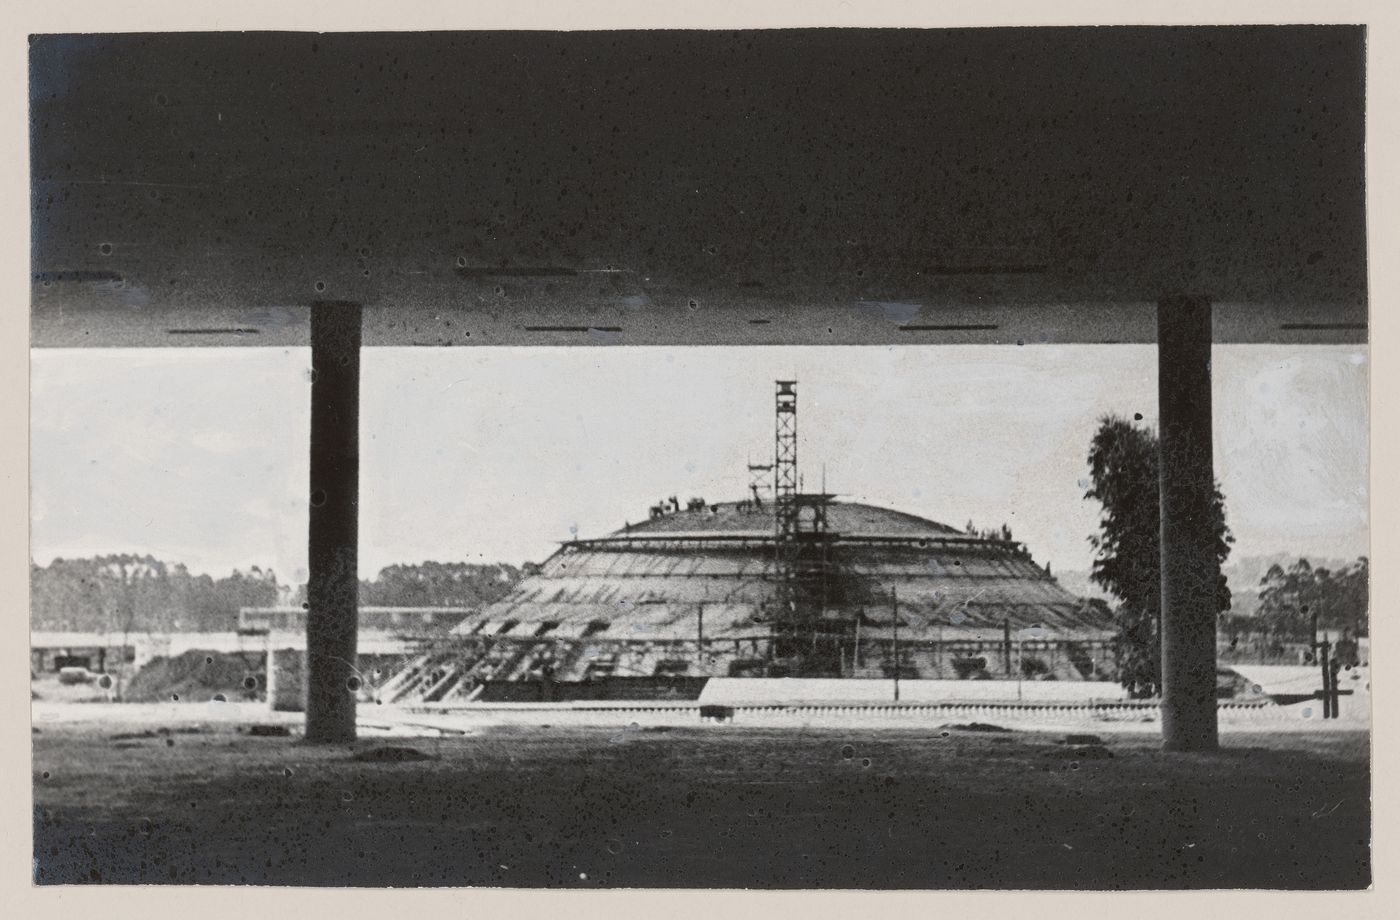 View of Palace of the Arts, under construction, São Paulo, Brazil
